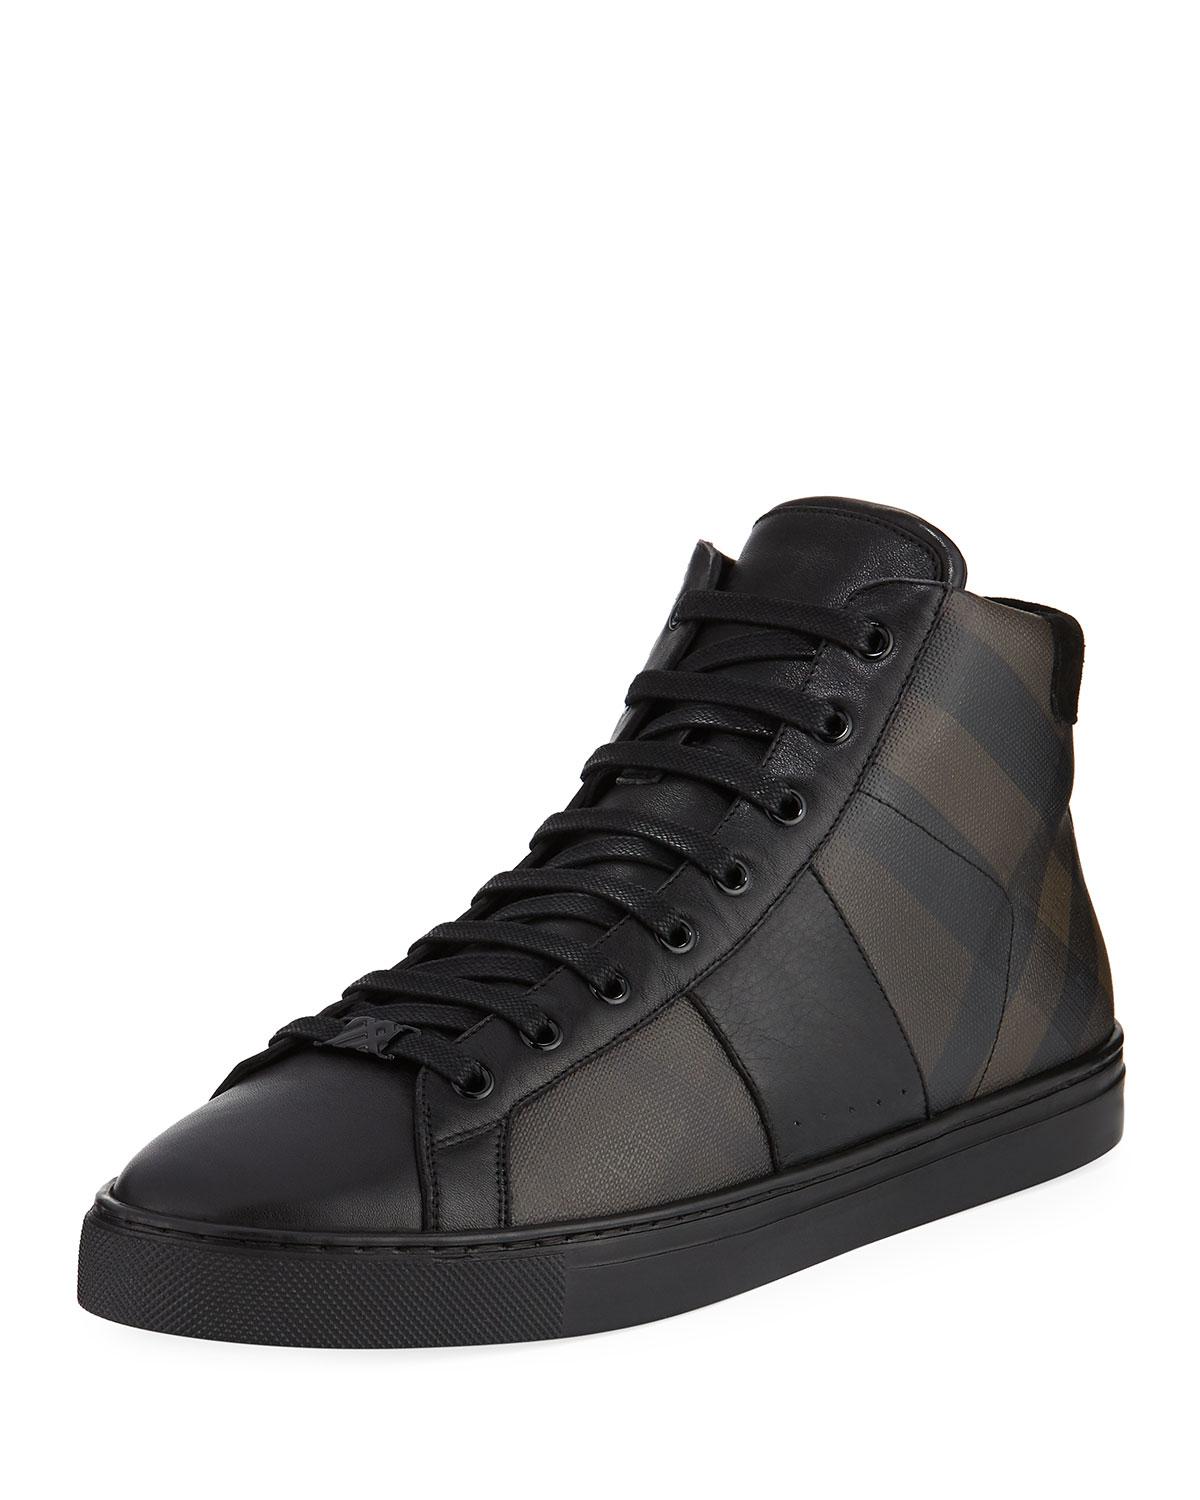 Check Sneakers in Brown for Men - Lyst